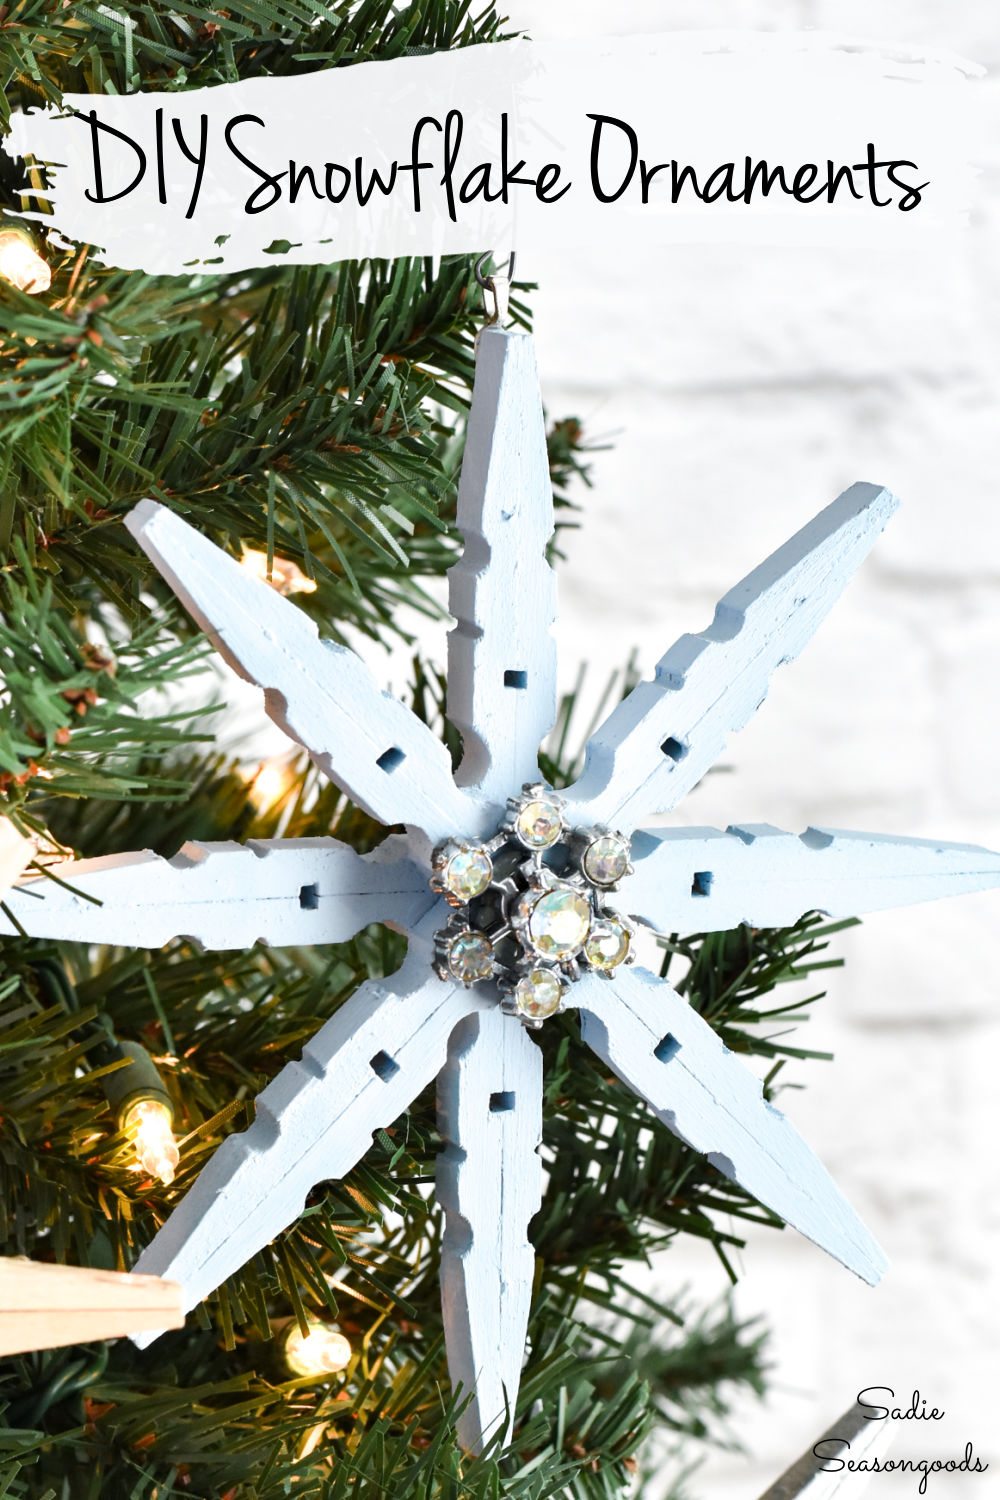 wooden snowflake ornaments from wooden clothespins